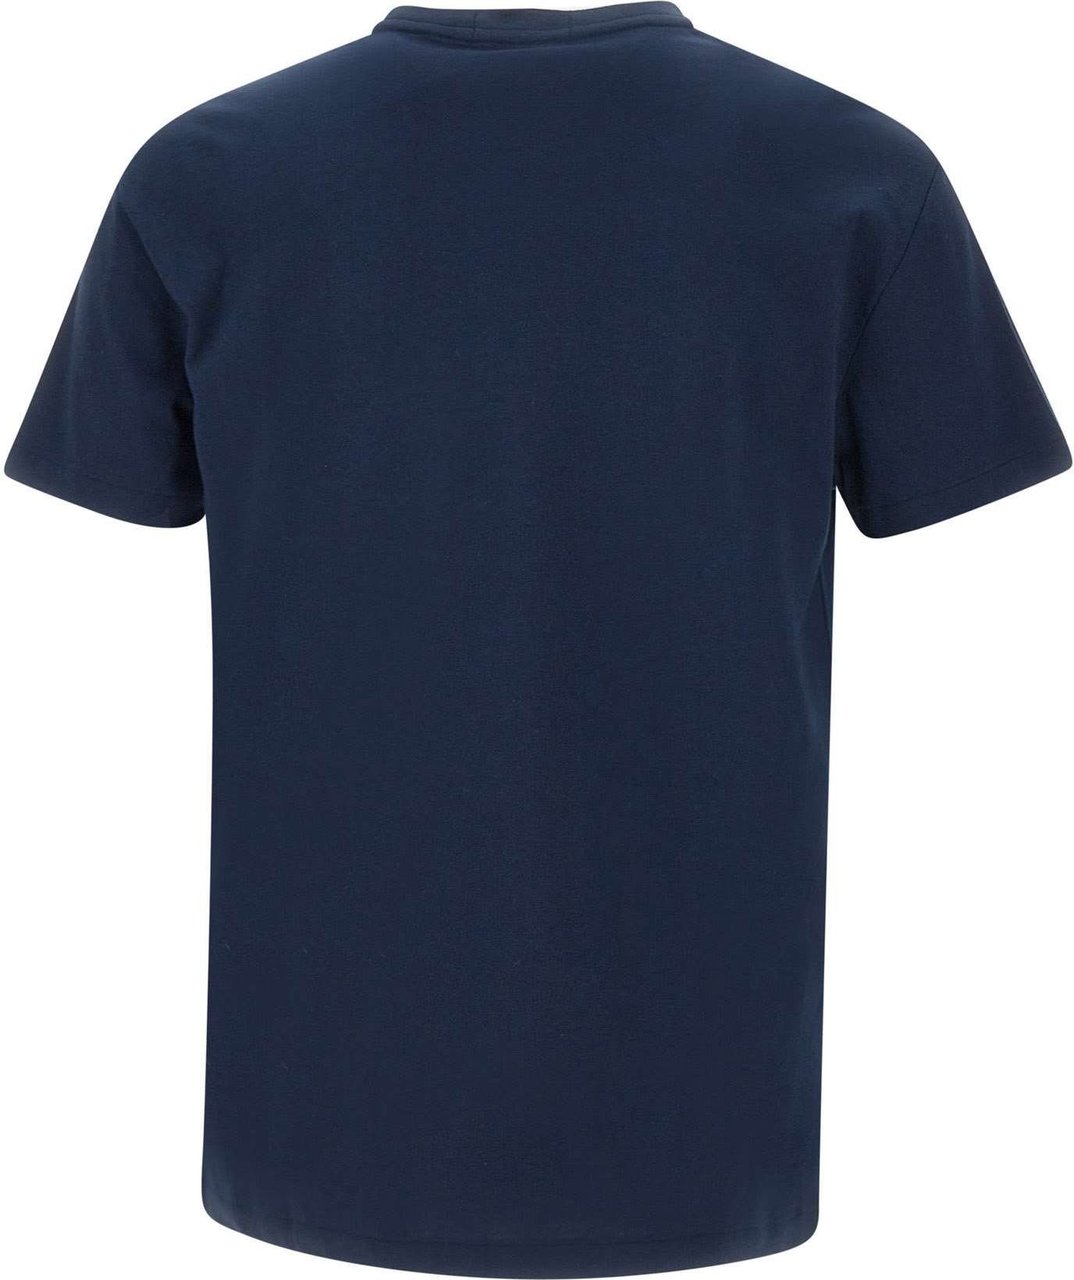 Ralph Lauren Polo T-shirts And Polos Blue Blauw